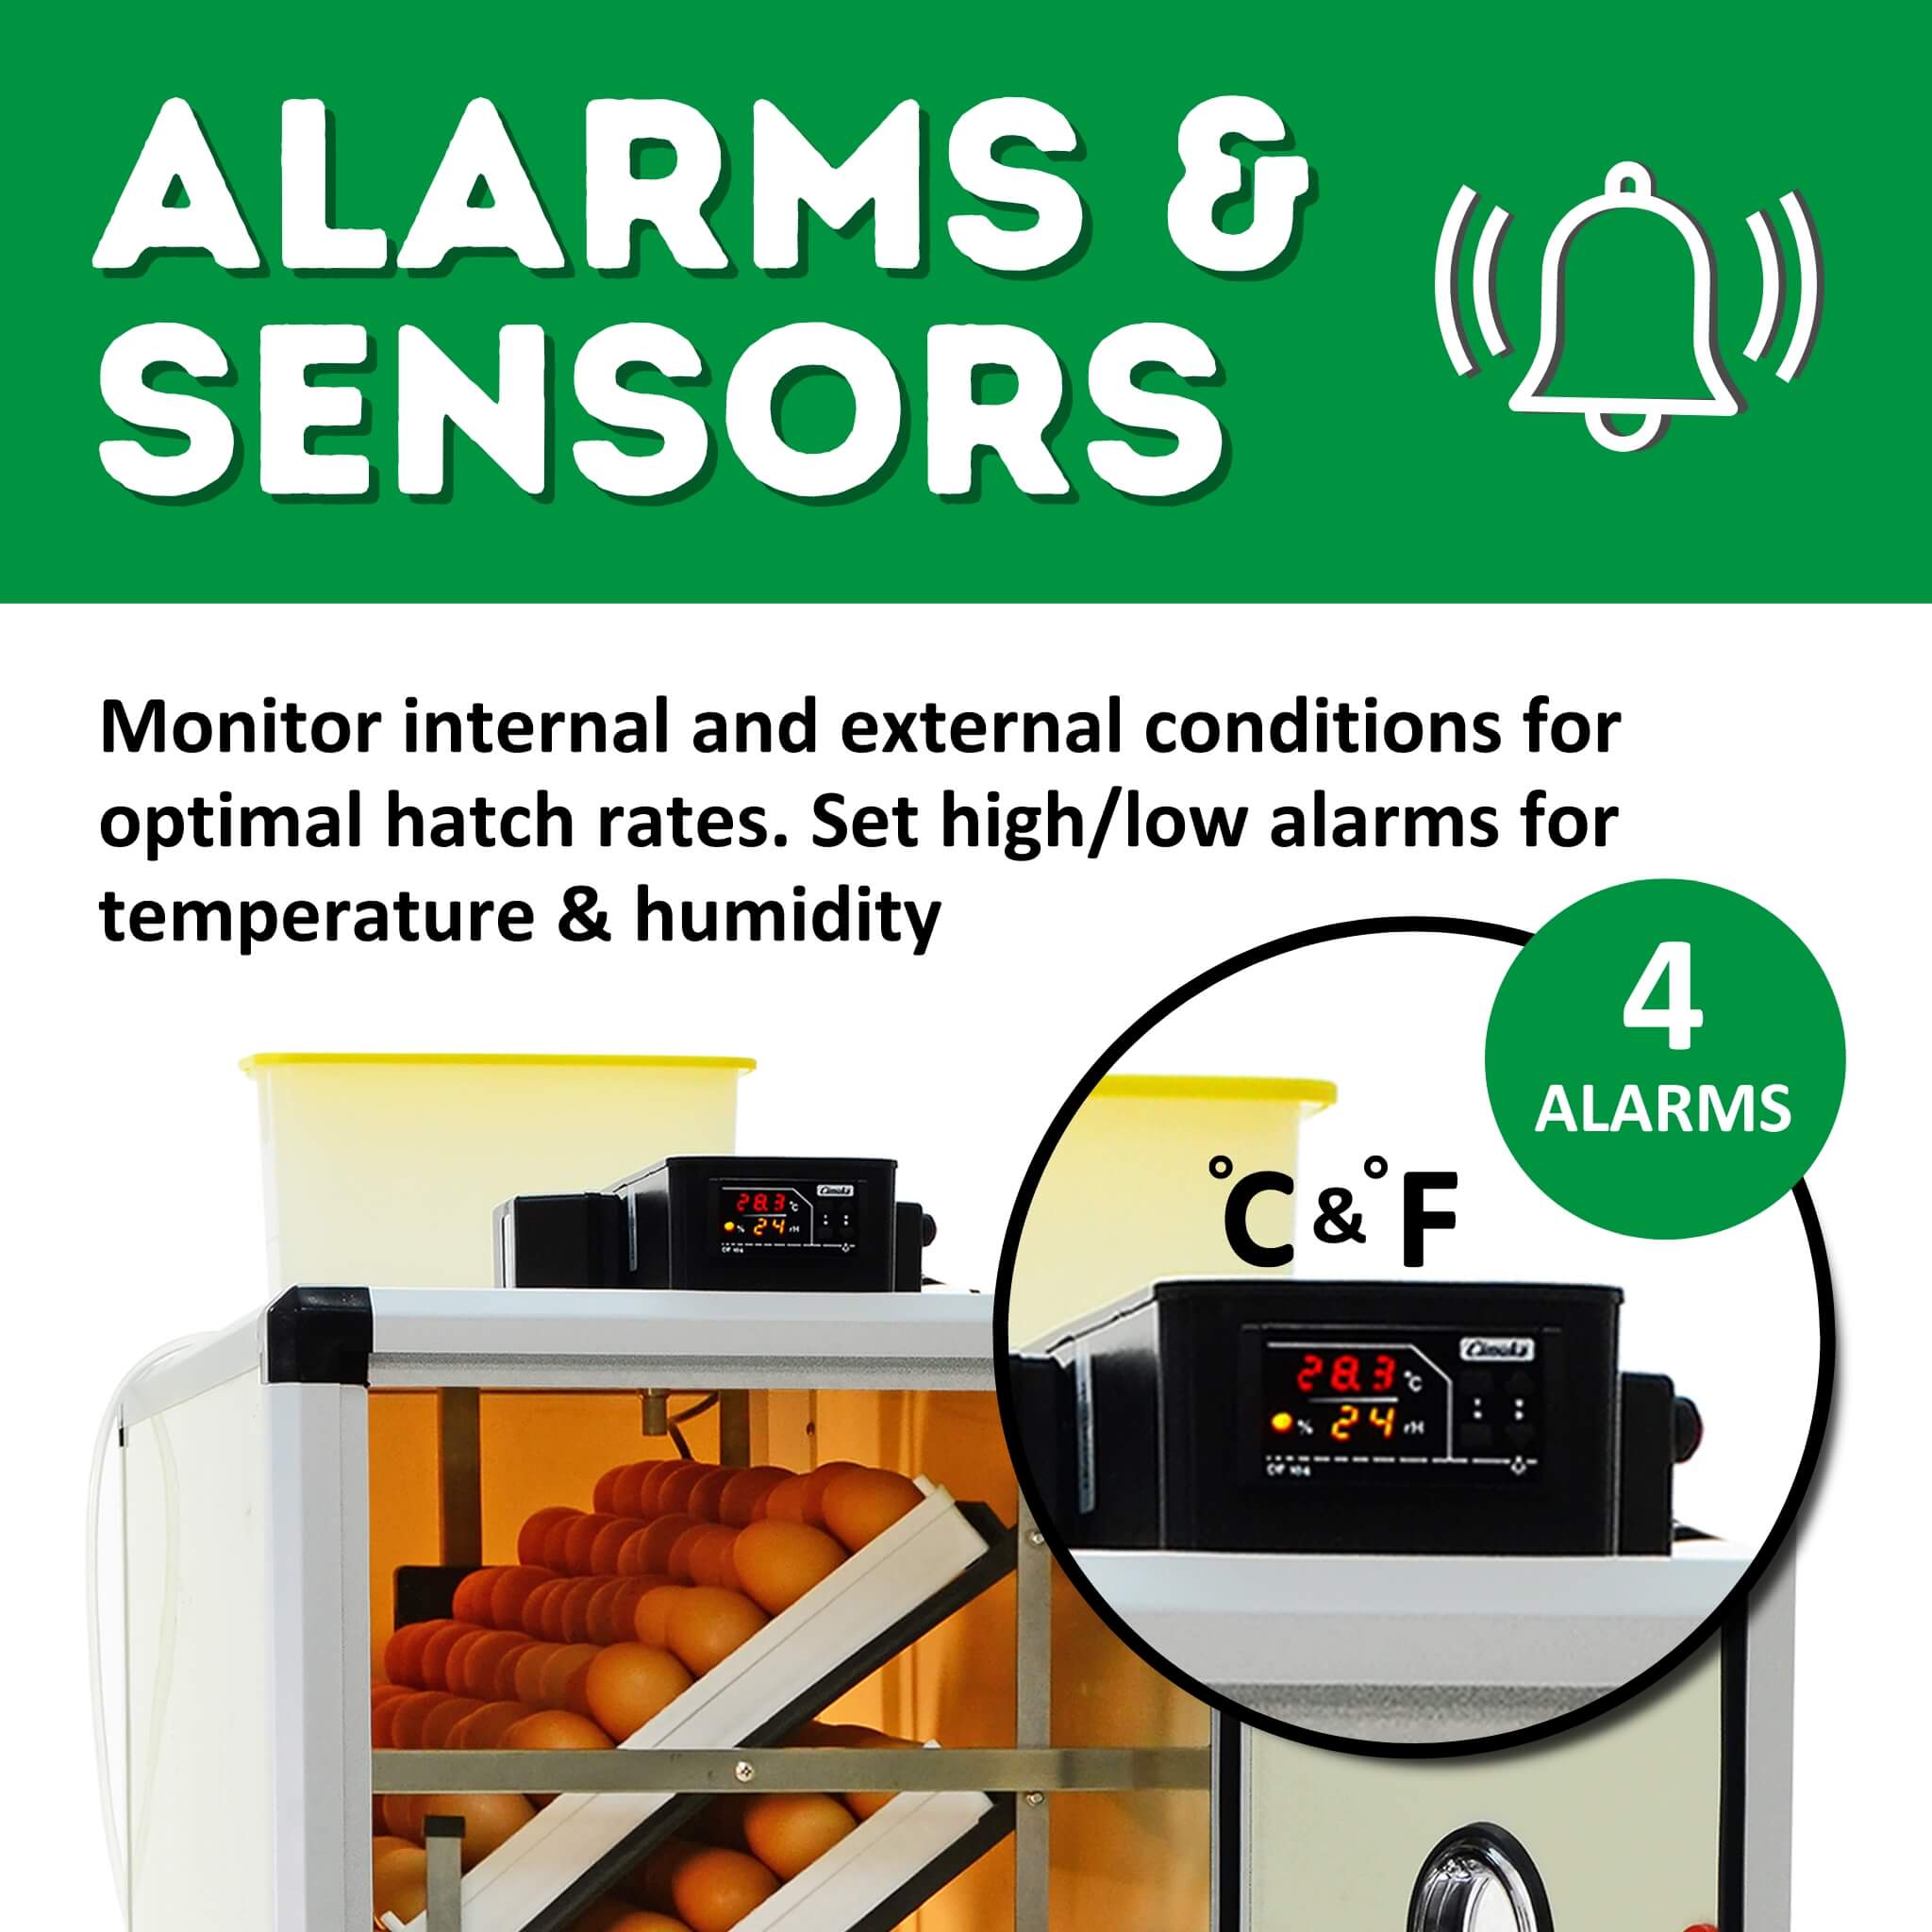 Hatching Time Cimuka. HB500S egg incubator's monitoring system, featuring four alarms for temperature and humidity control, crucial for high hatch rates in poultry farming.